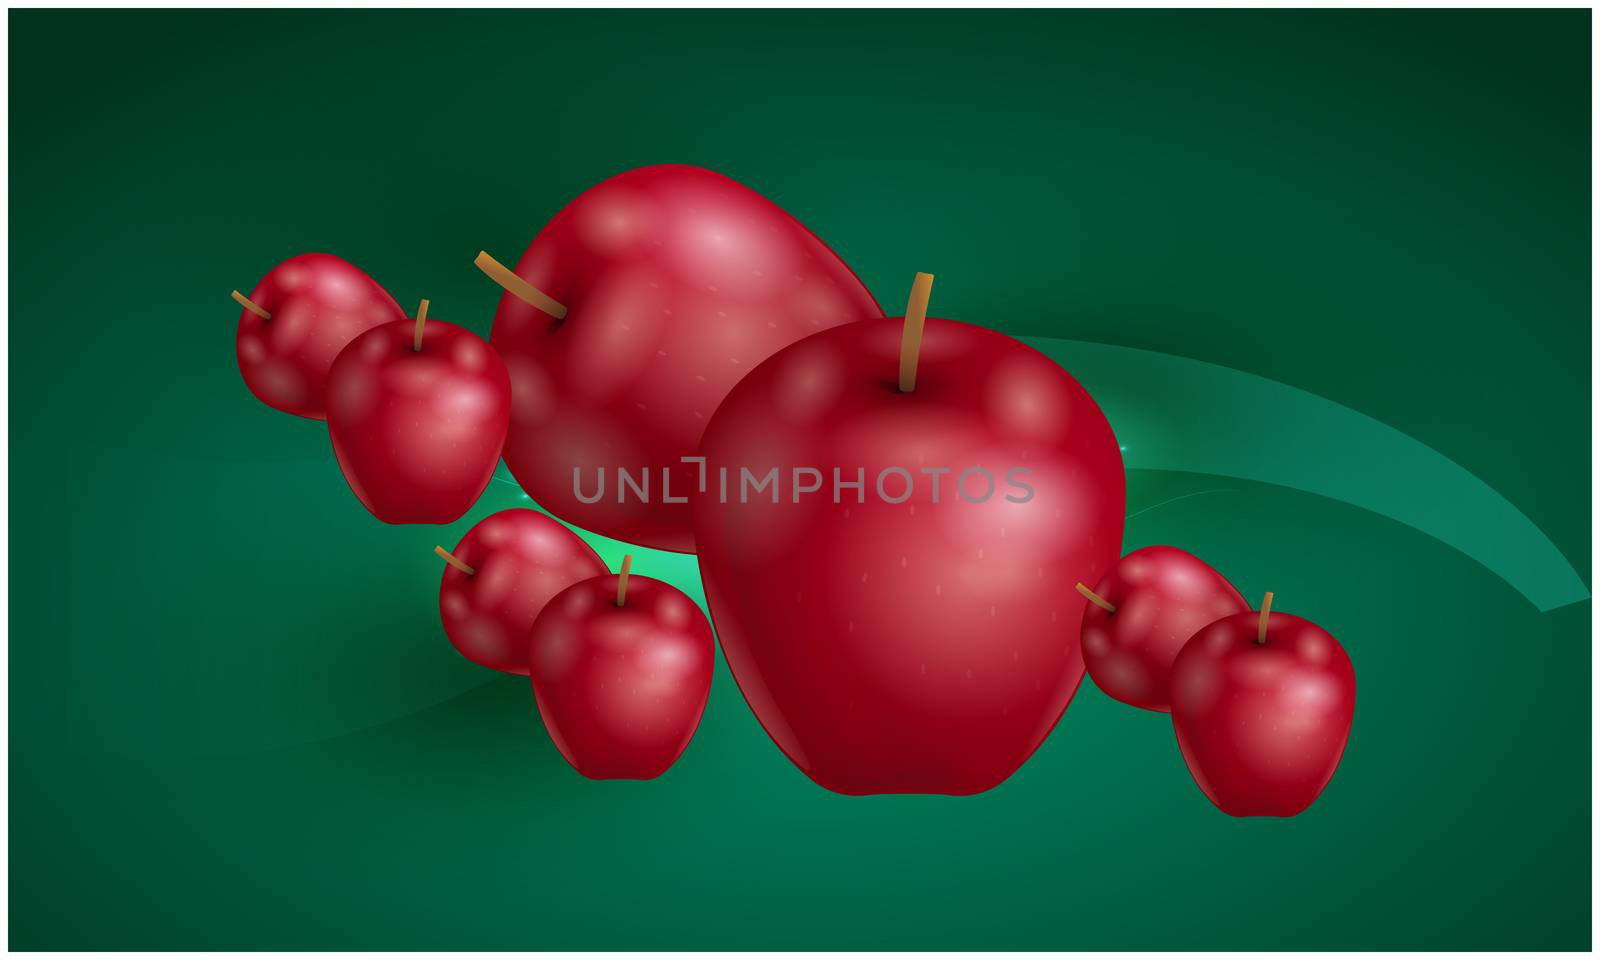 mock up illustration of real apples on abstract background